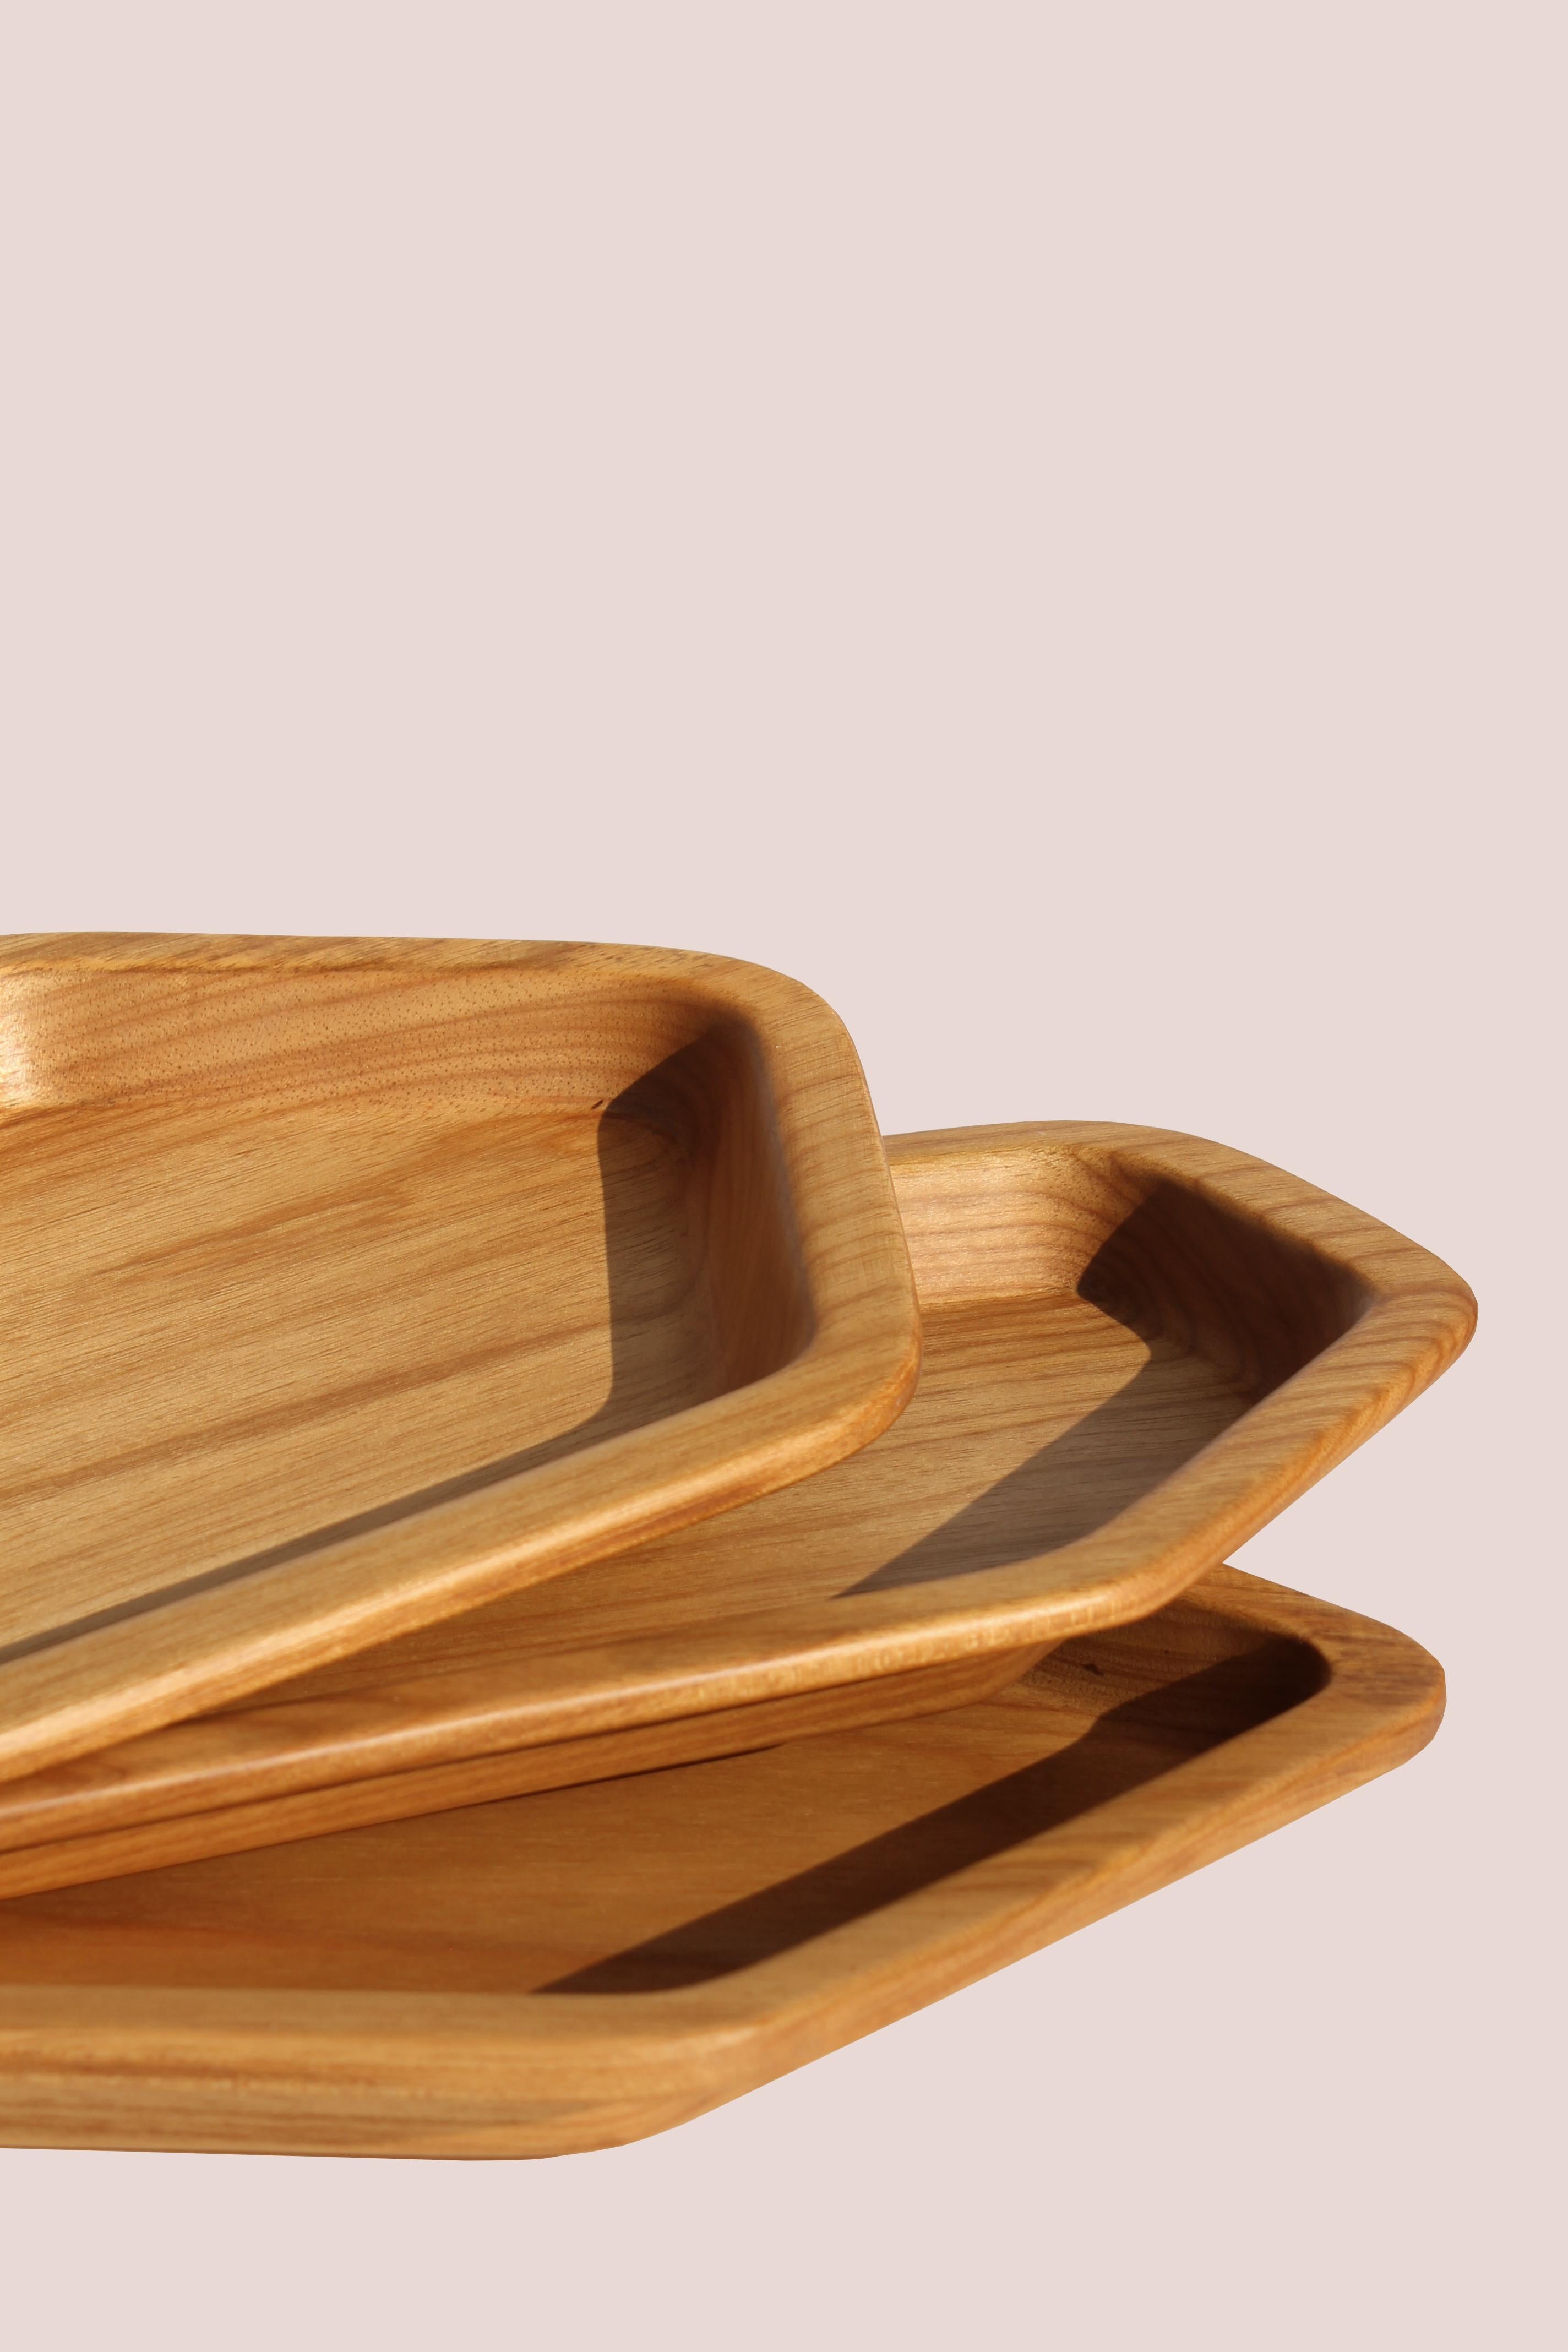 Modern Transgrid wood tray - Set (Tauari - 3 pieces) For Sale